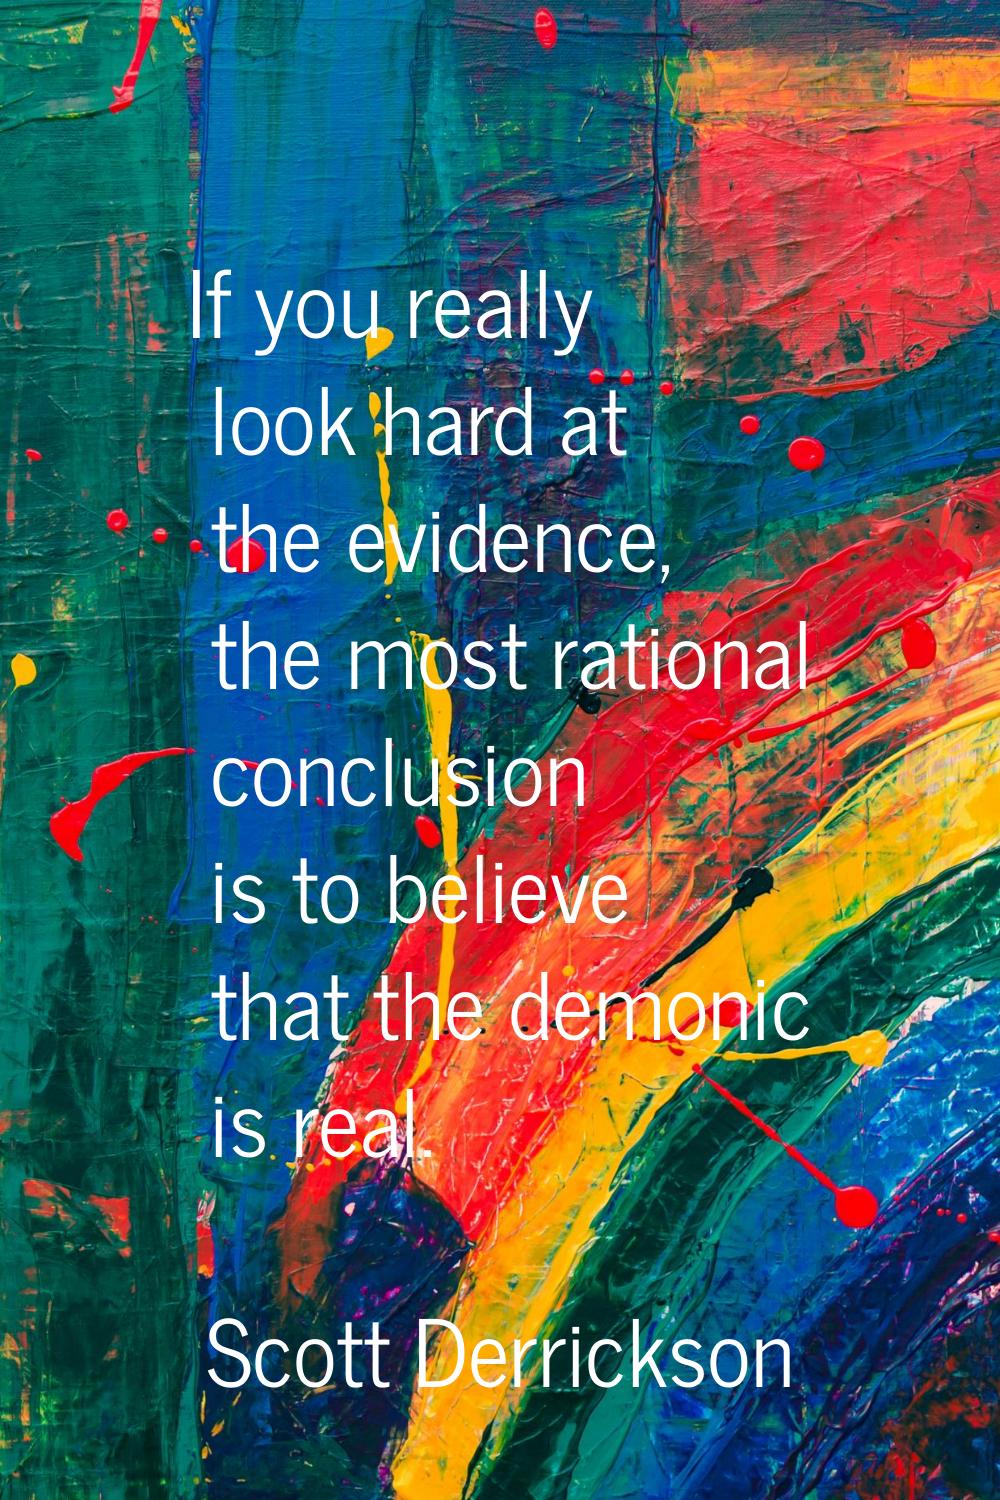 If you really look hard at the evidence, the most rational conclusion is to believe that the demoni